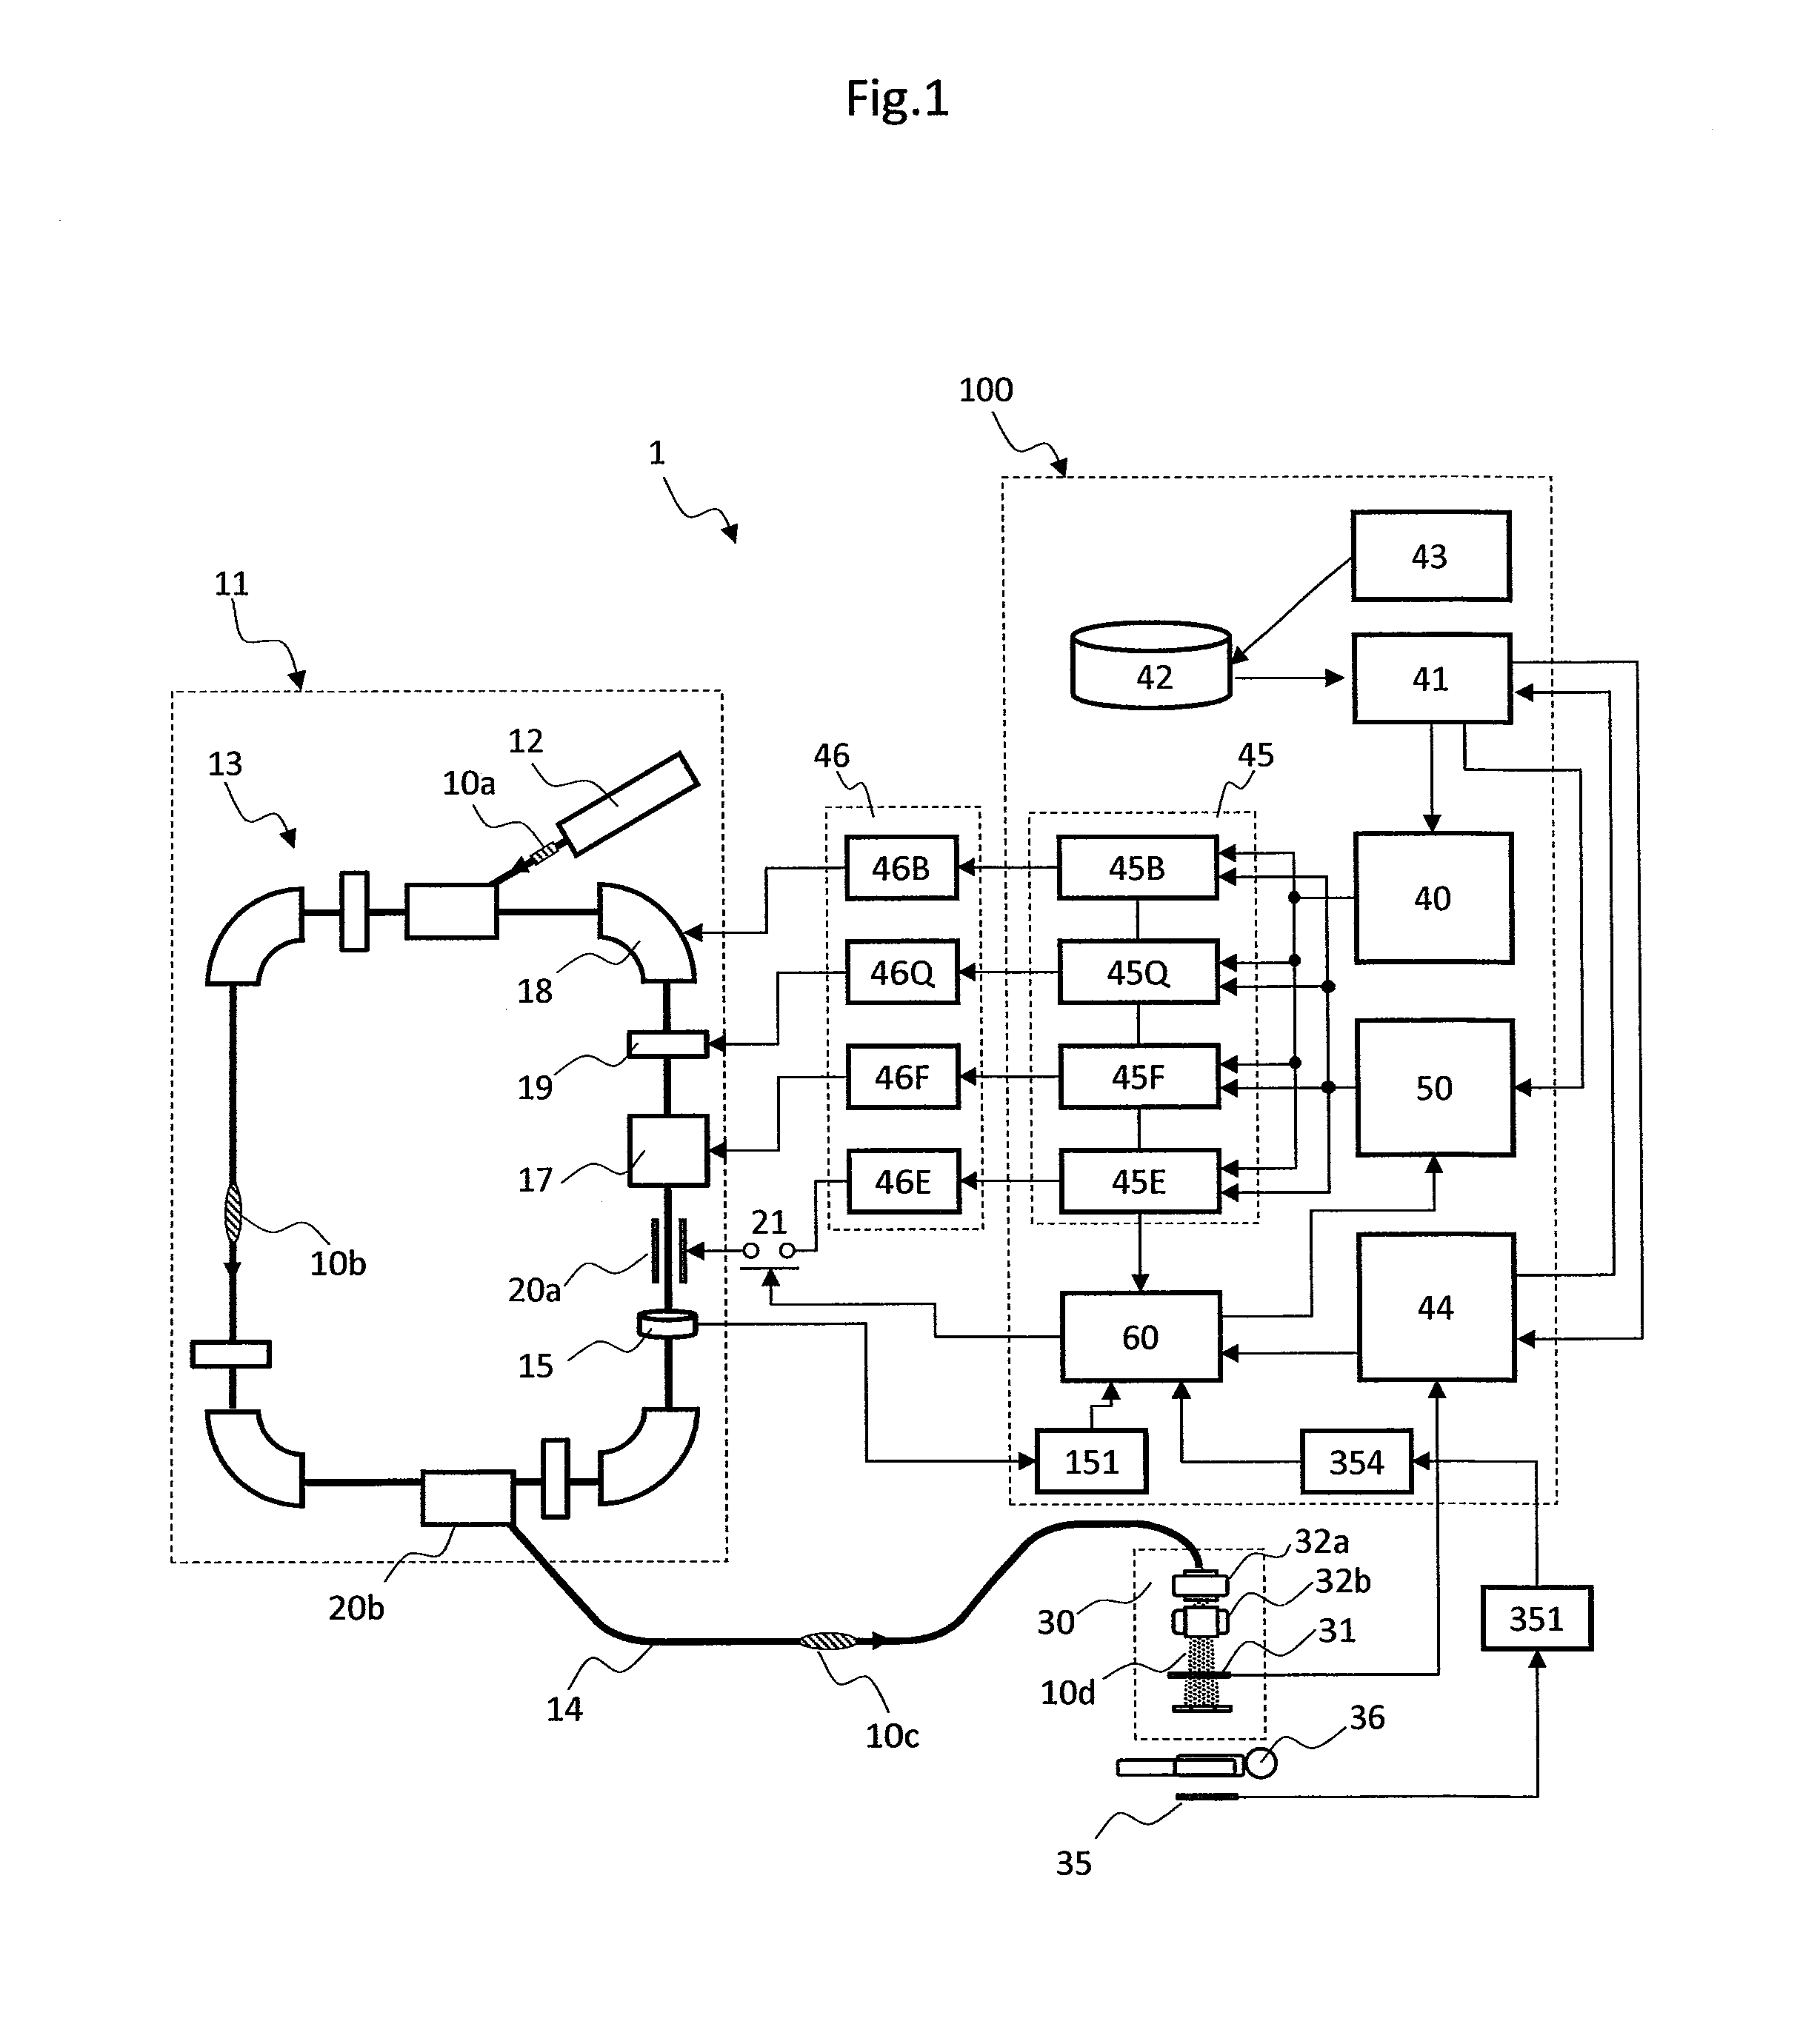 Particle beam irradiation system and method for operating the same